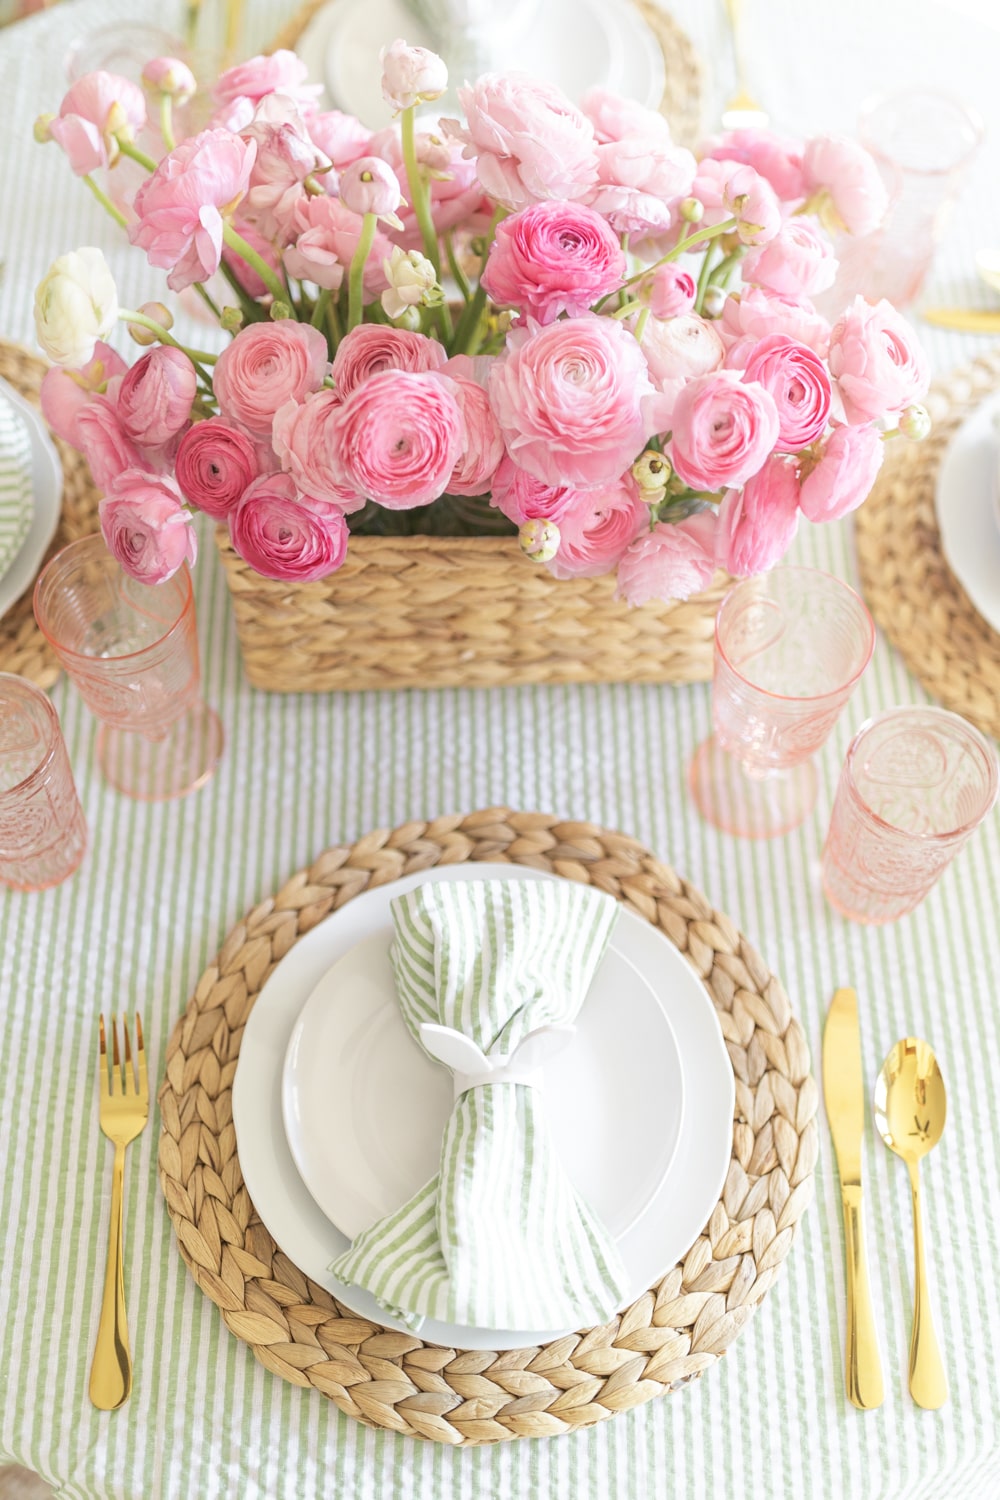 Simple Easter brunch tablescape and rustic spring centerpiece designed by blogger Stephanie Ziajka on Diary of a Debutante